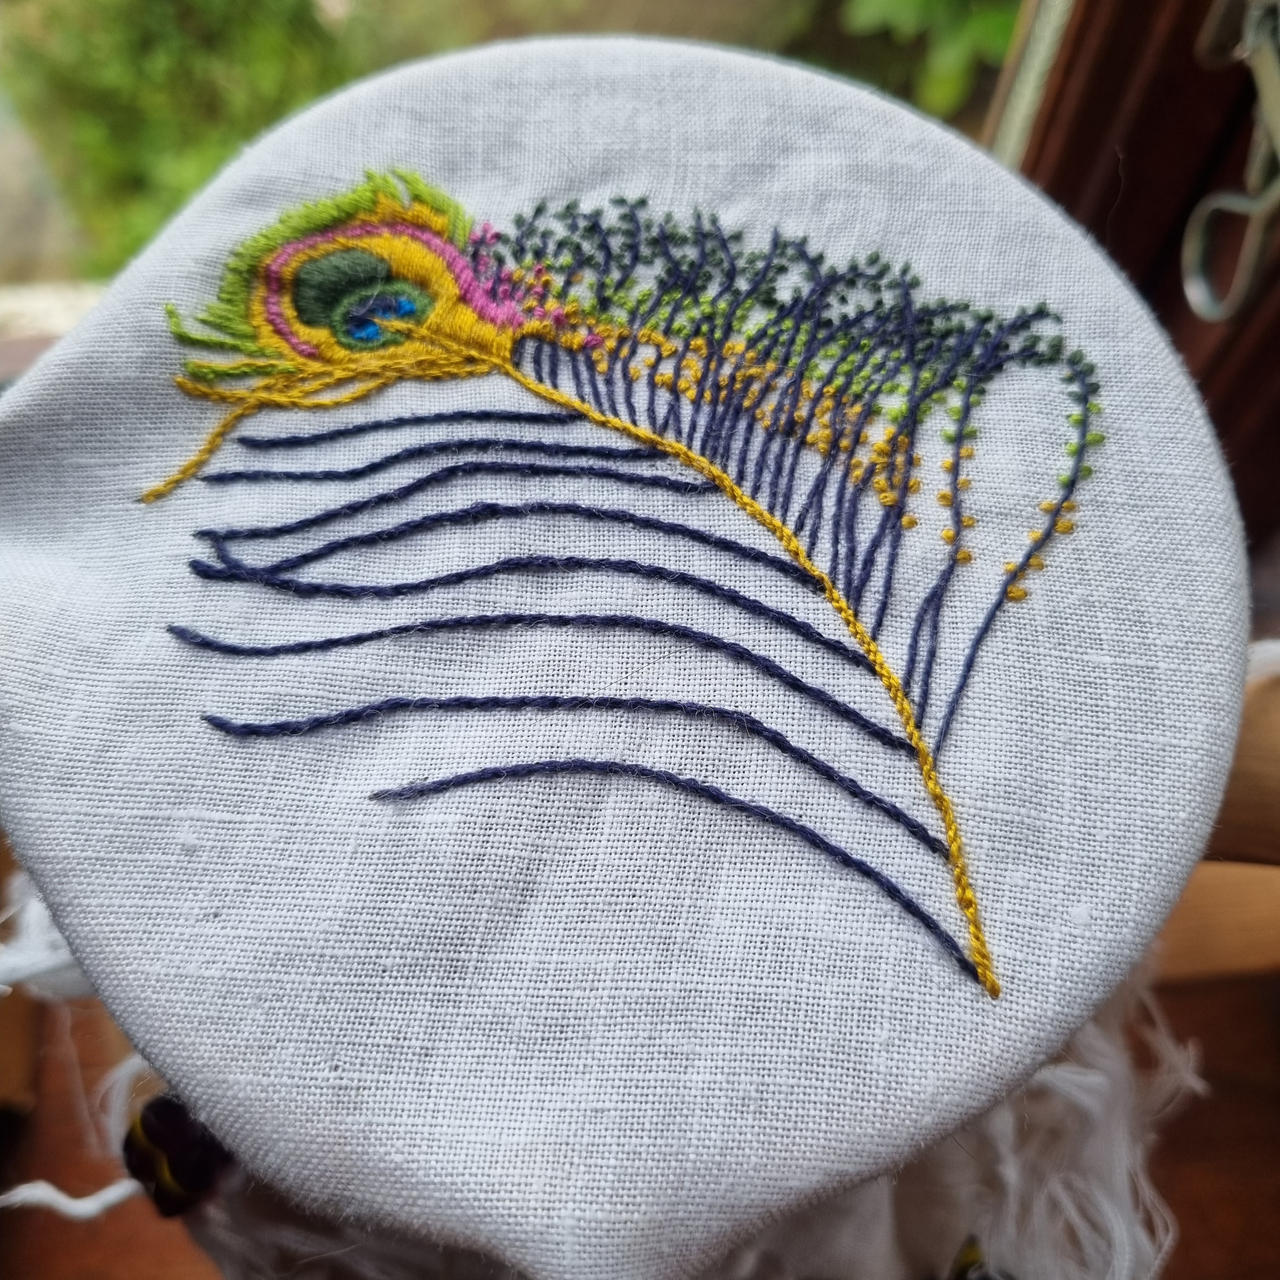 Peacock feather embroidery by The-Lass on DeviantArt